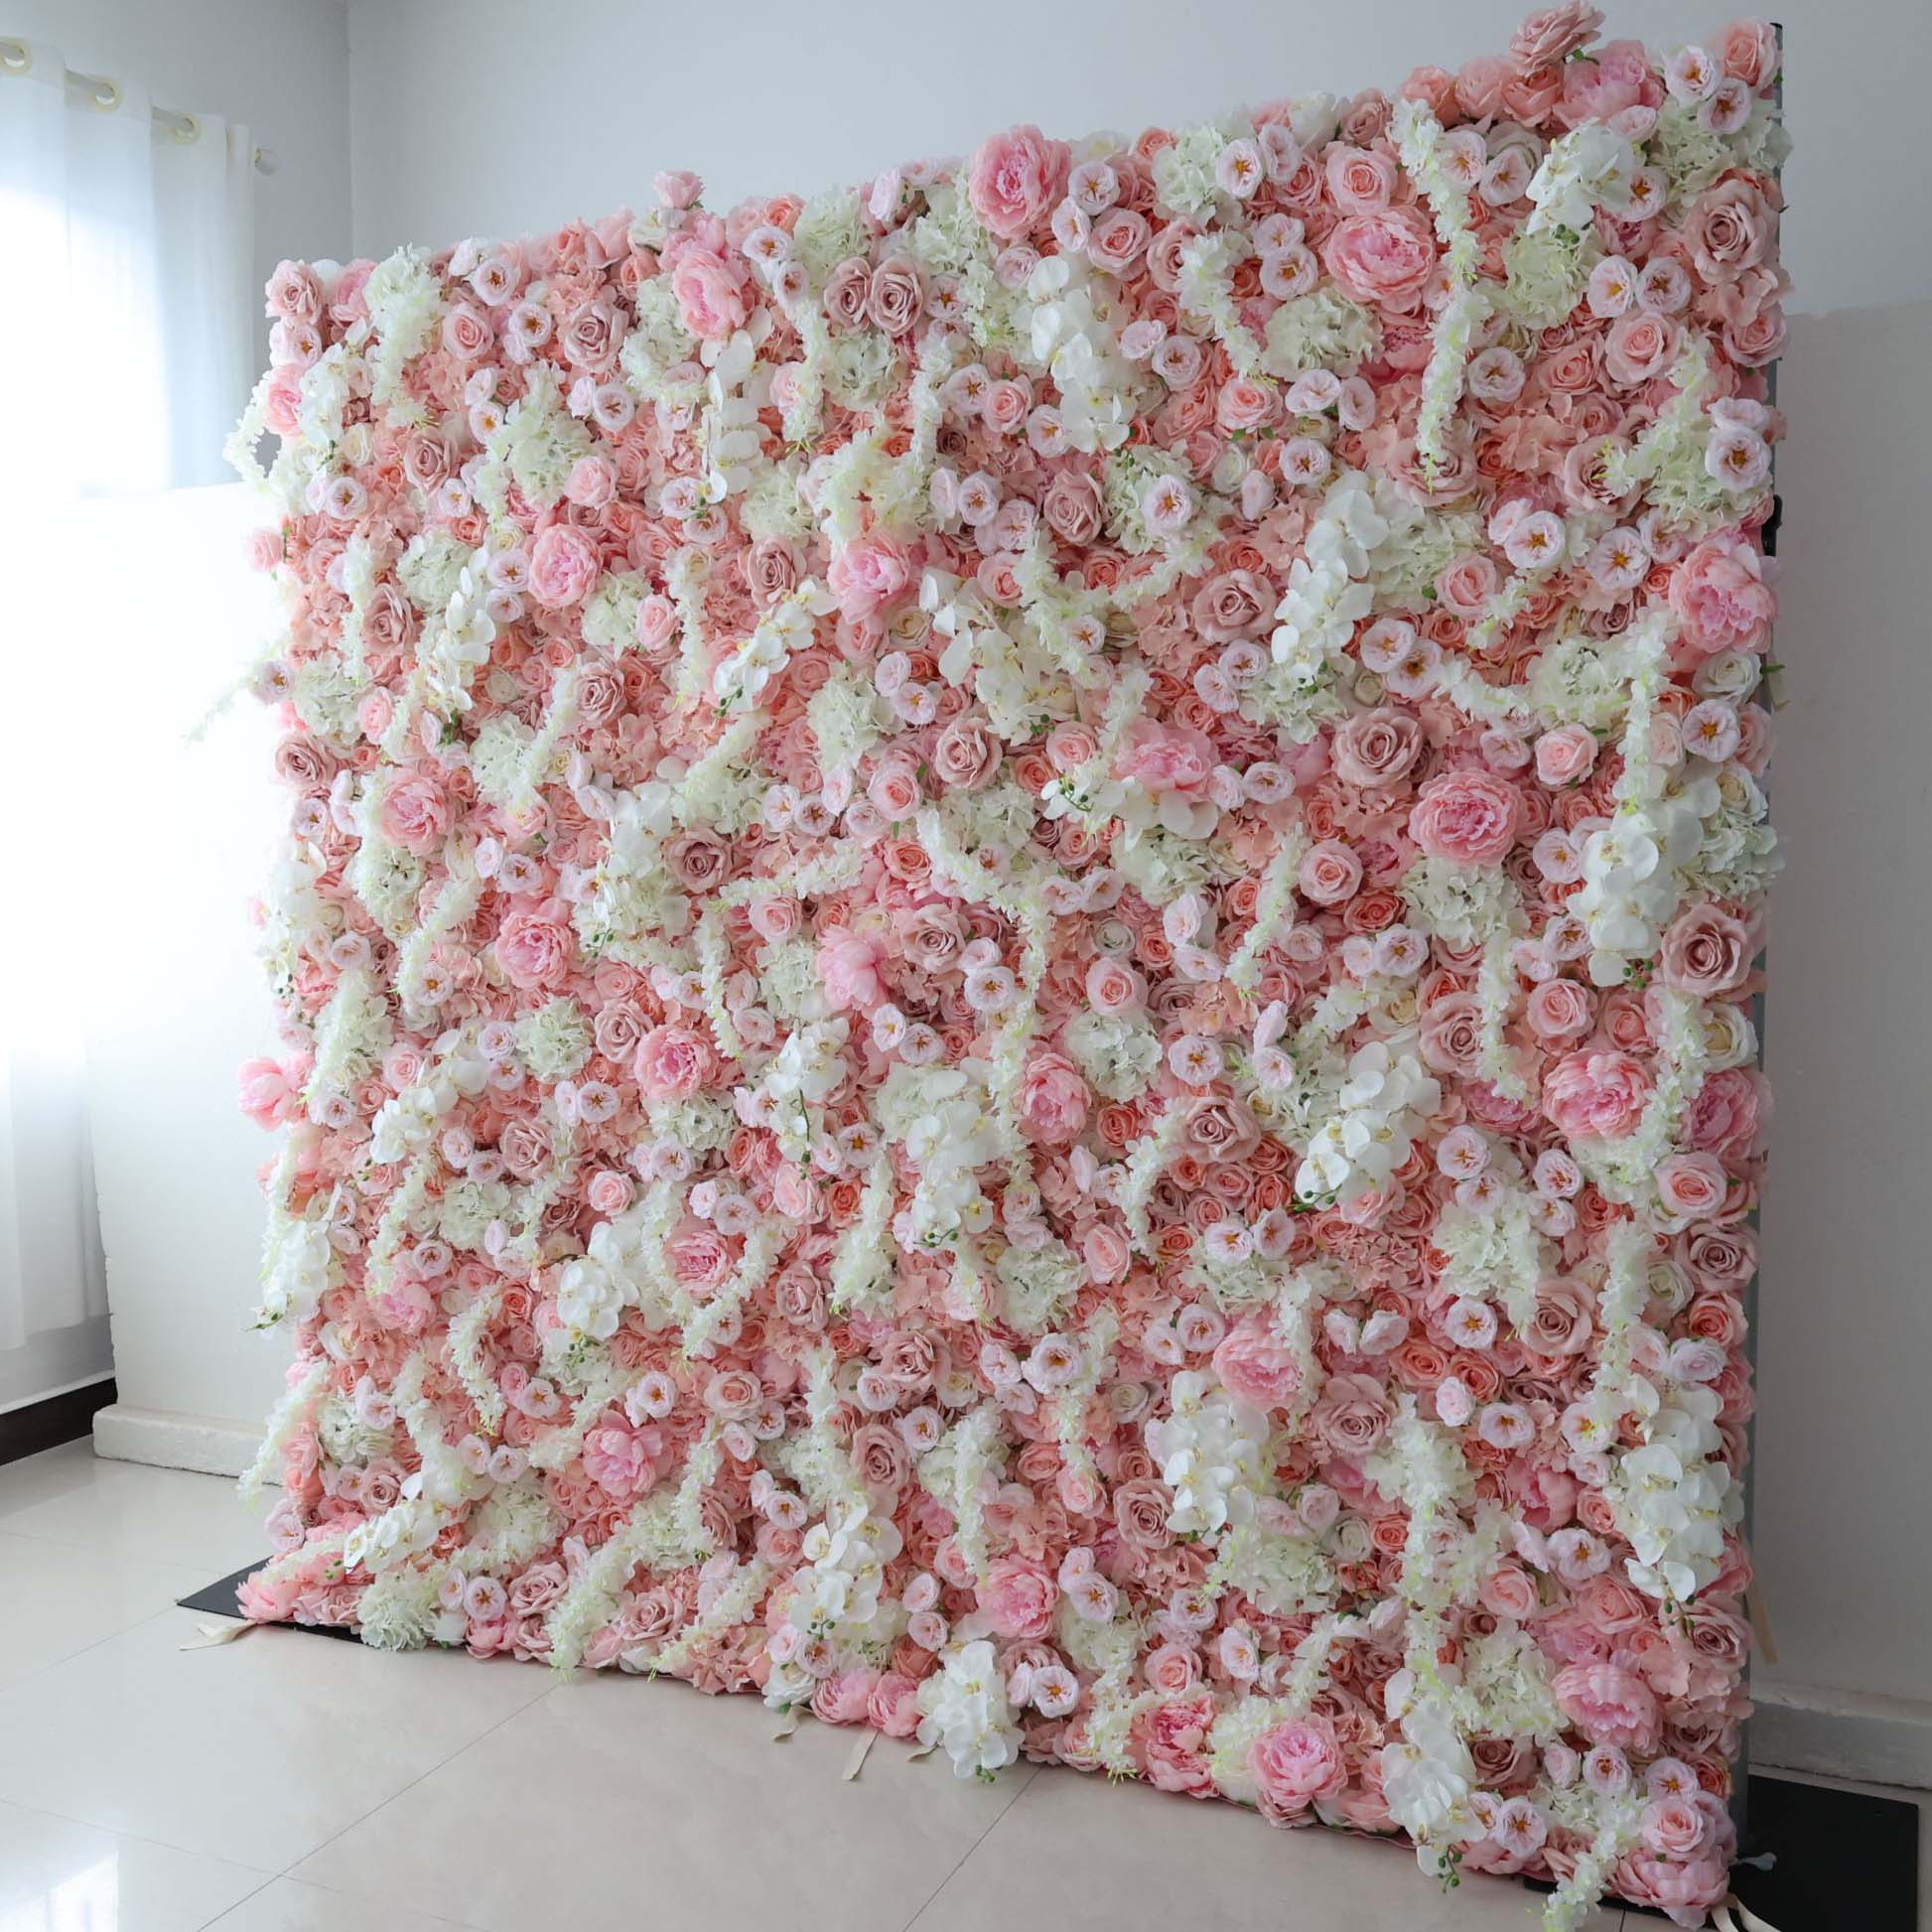 Valar Flowers roll up fabric artificial flower wall for wedding backdrop, floral design VF-3040